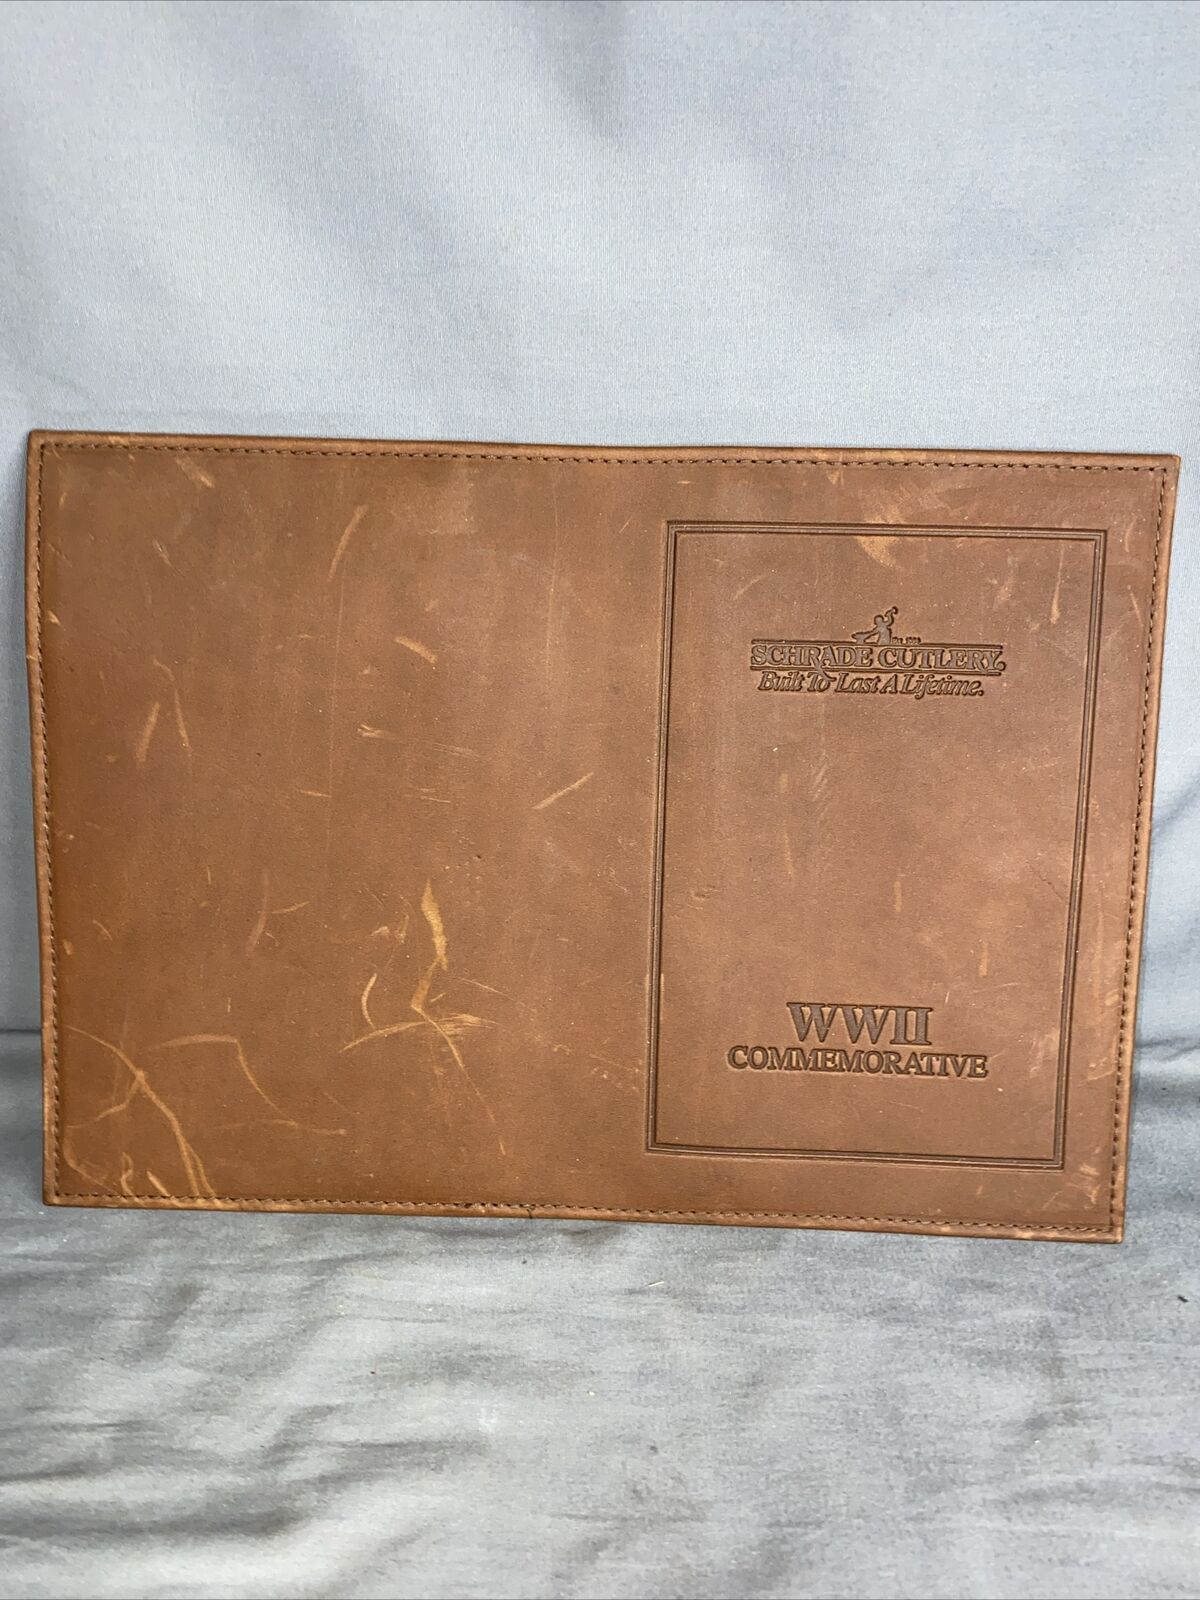 New Schrade Cutlery Leather WWII Commemorative Book Cover 